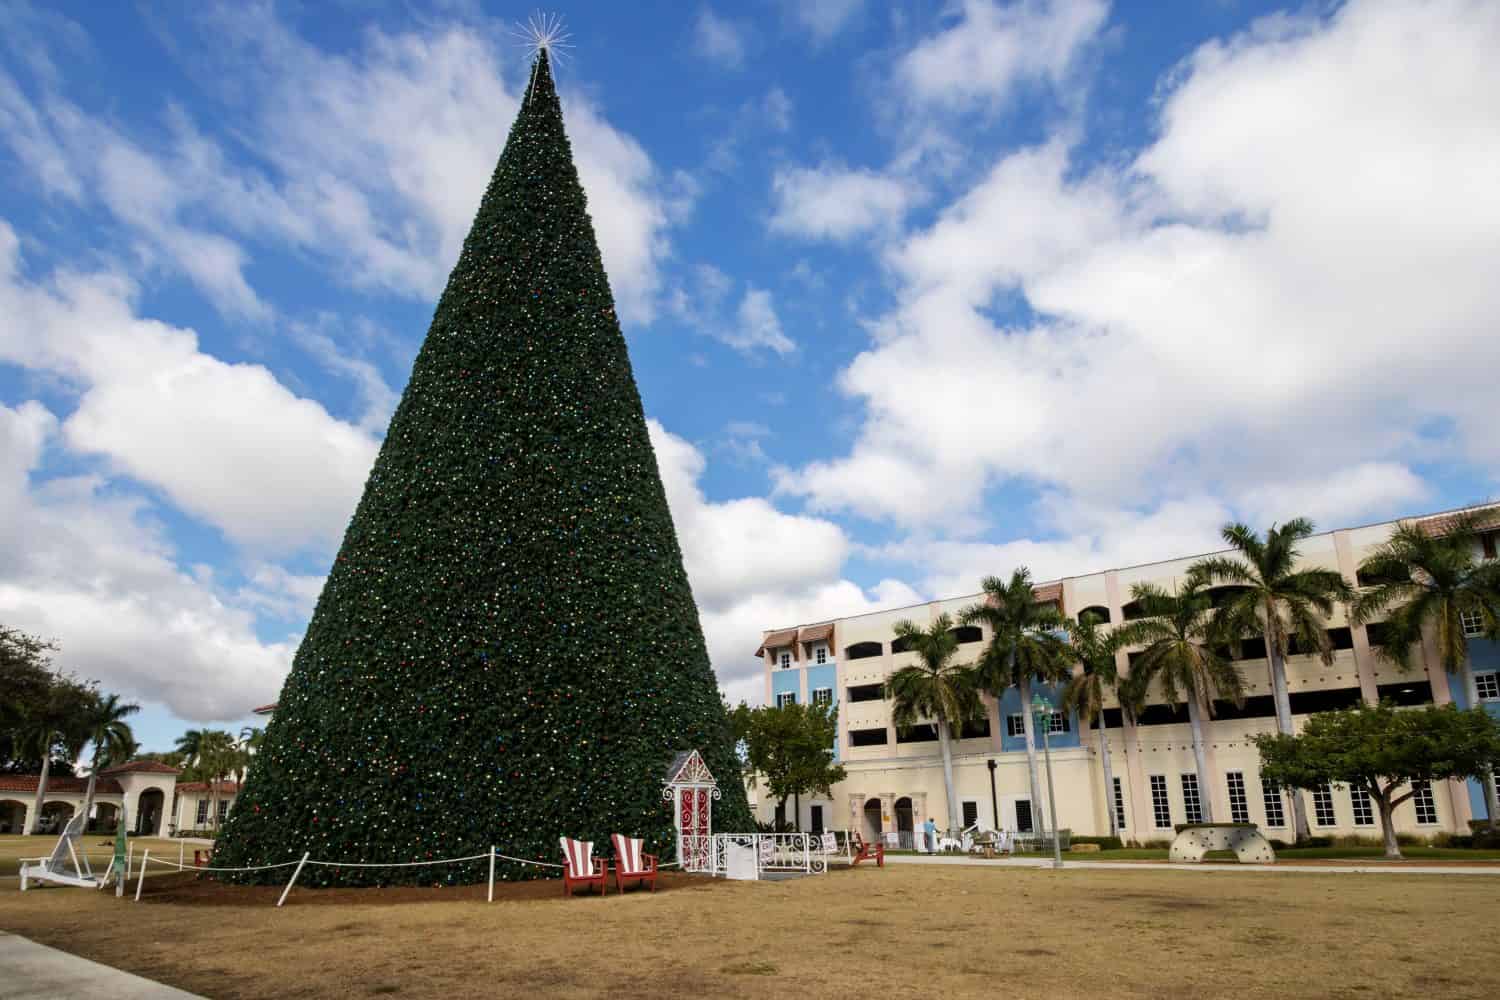 The magnificent 100ft Christmas Tree in Delray Beach, Florida, USA